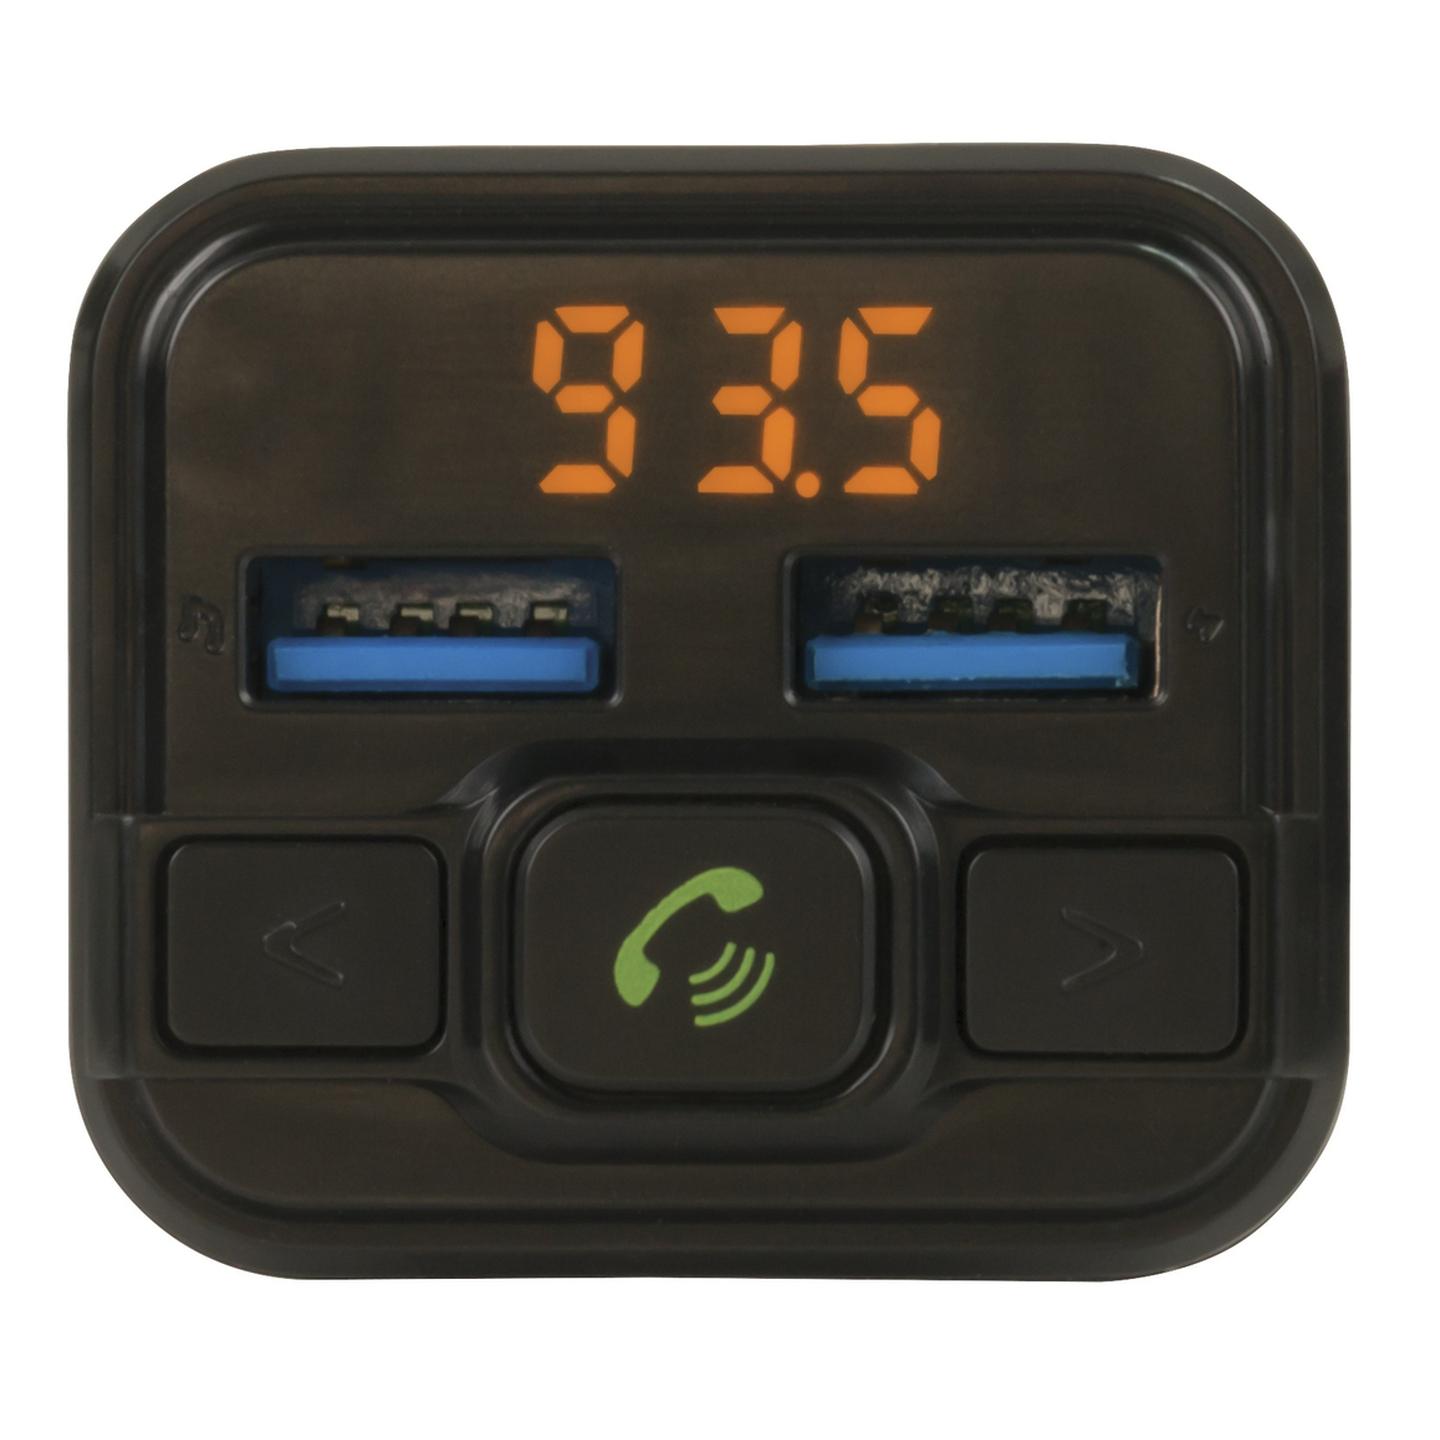 Digitech FM Transmitter with Bluetooth Technology and USB